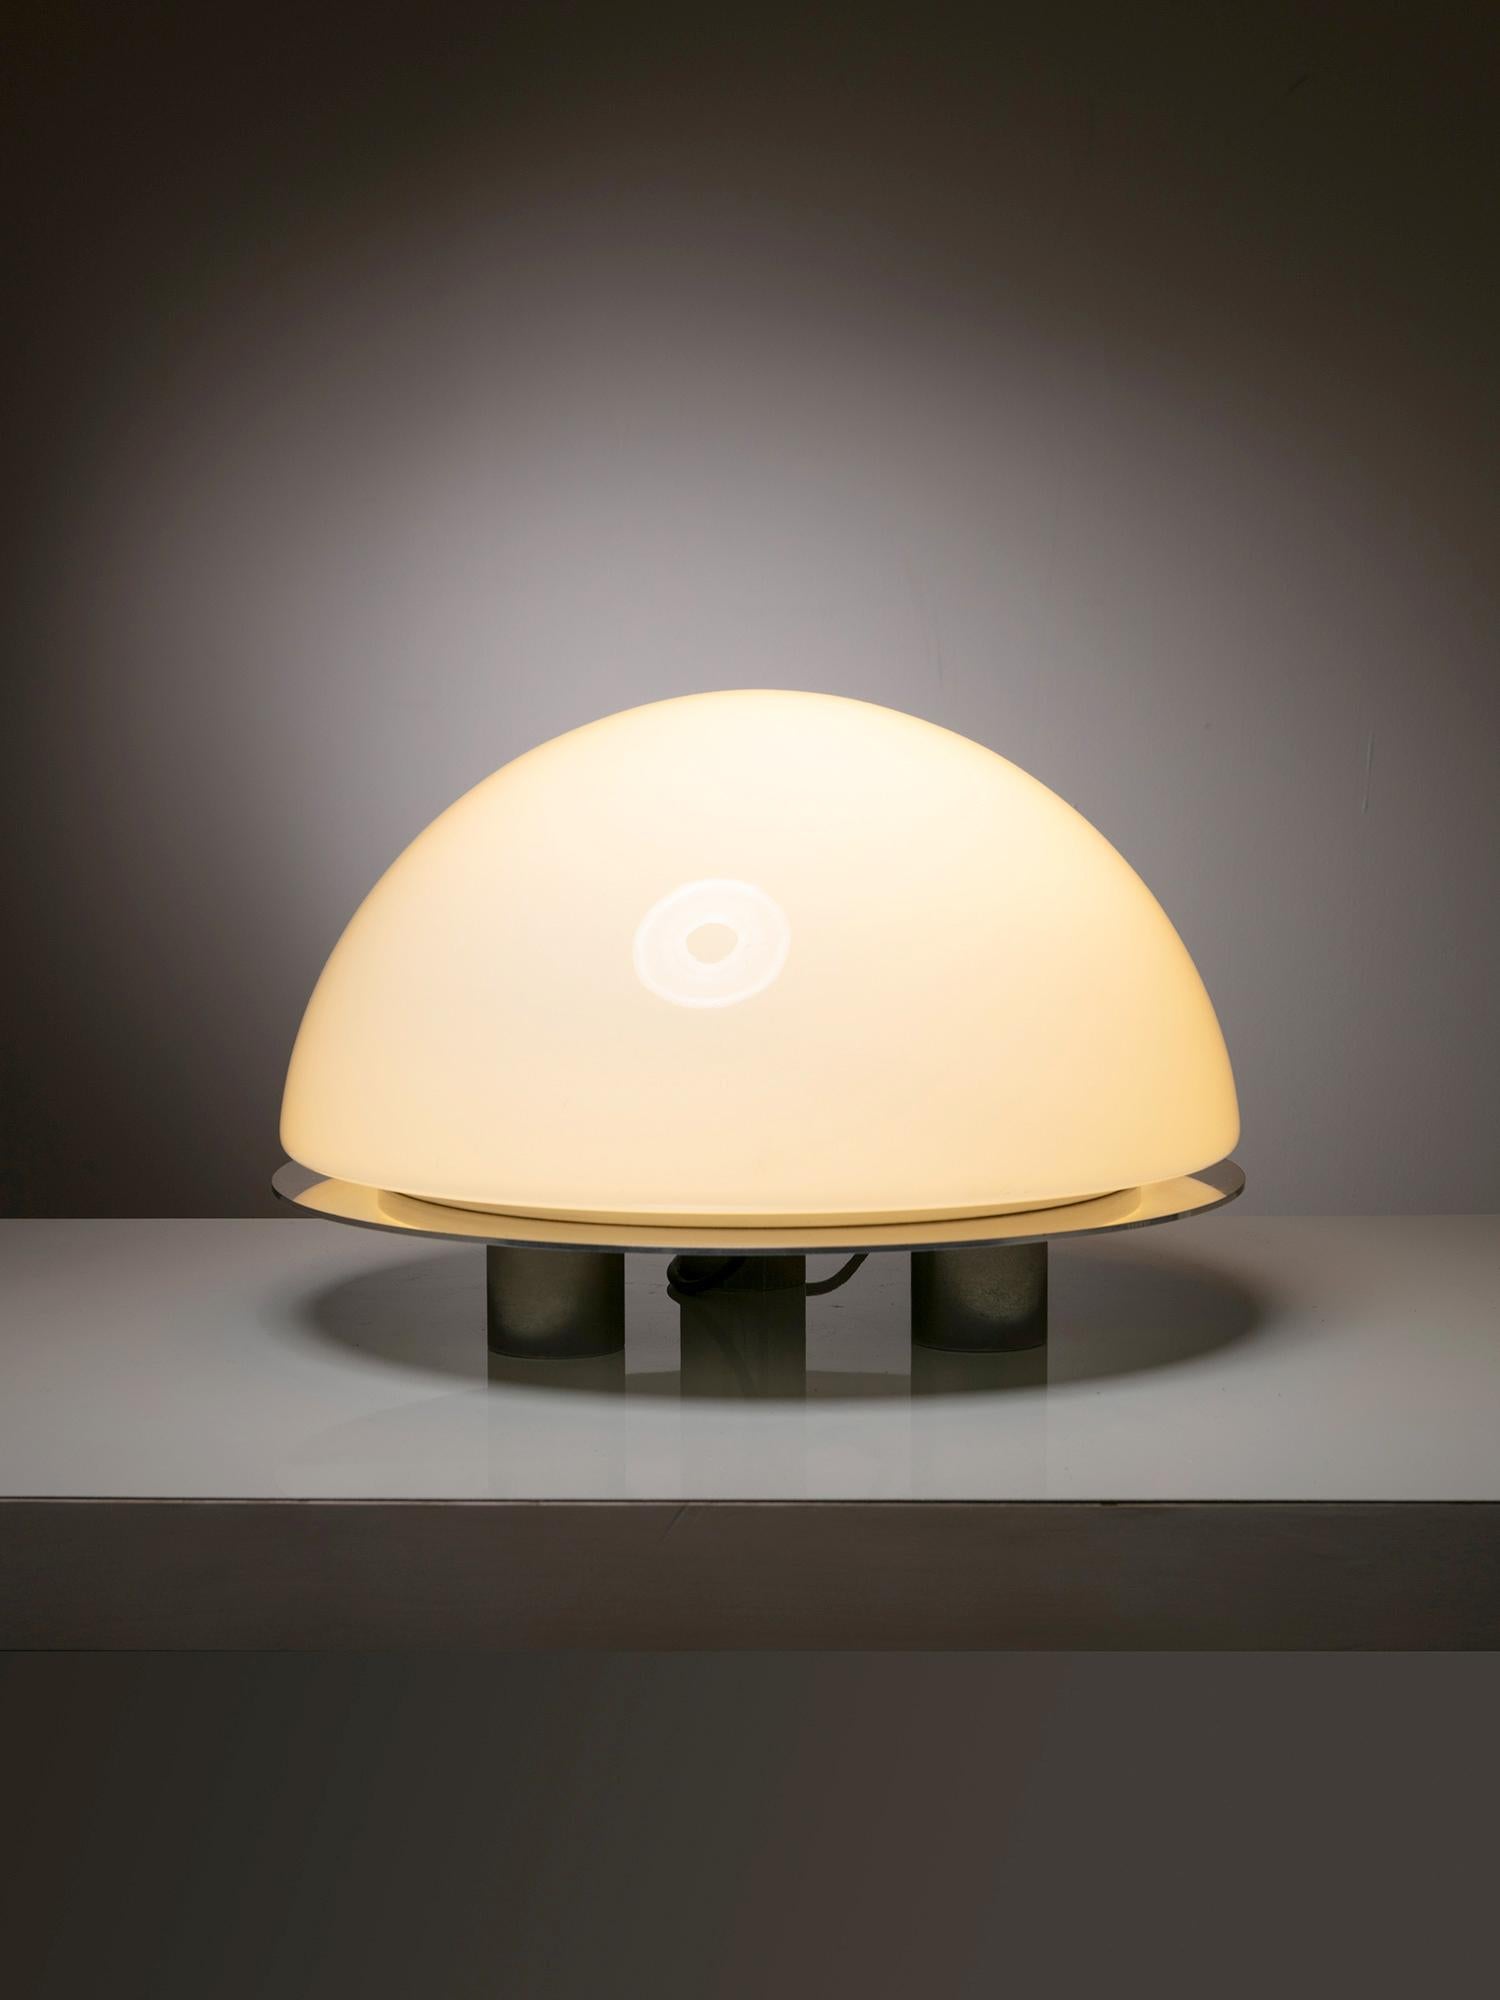 Italian 70s table lamp.
Round steel disc supports a large opaline glass shade.